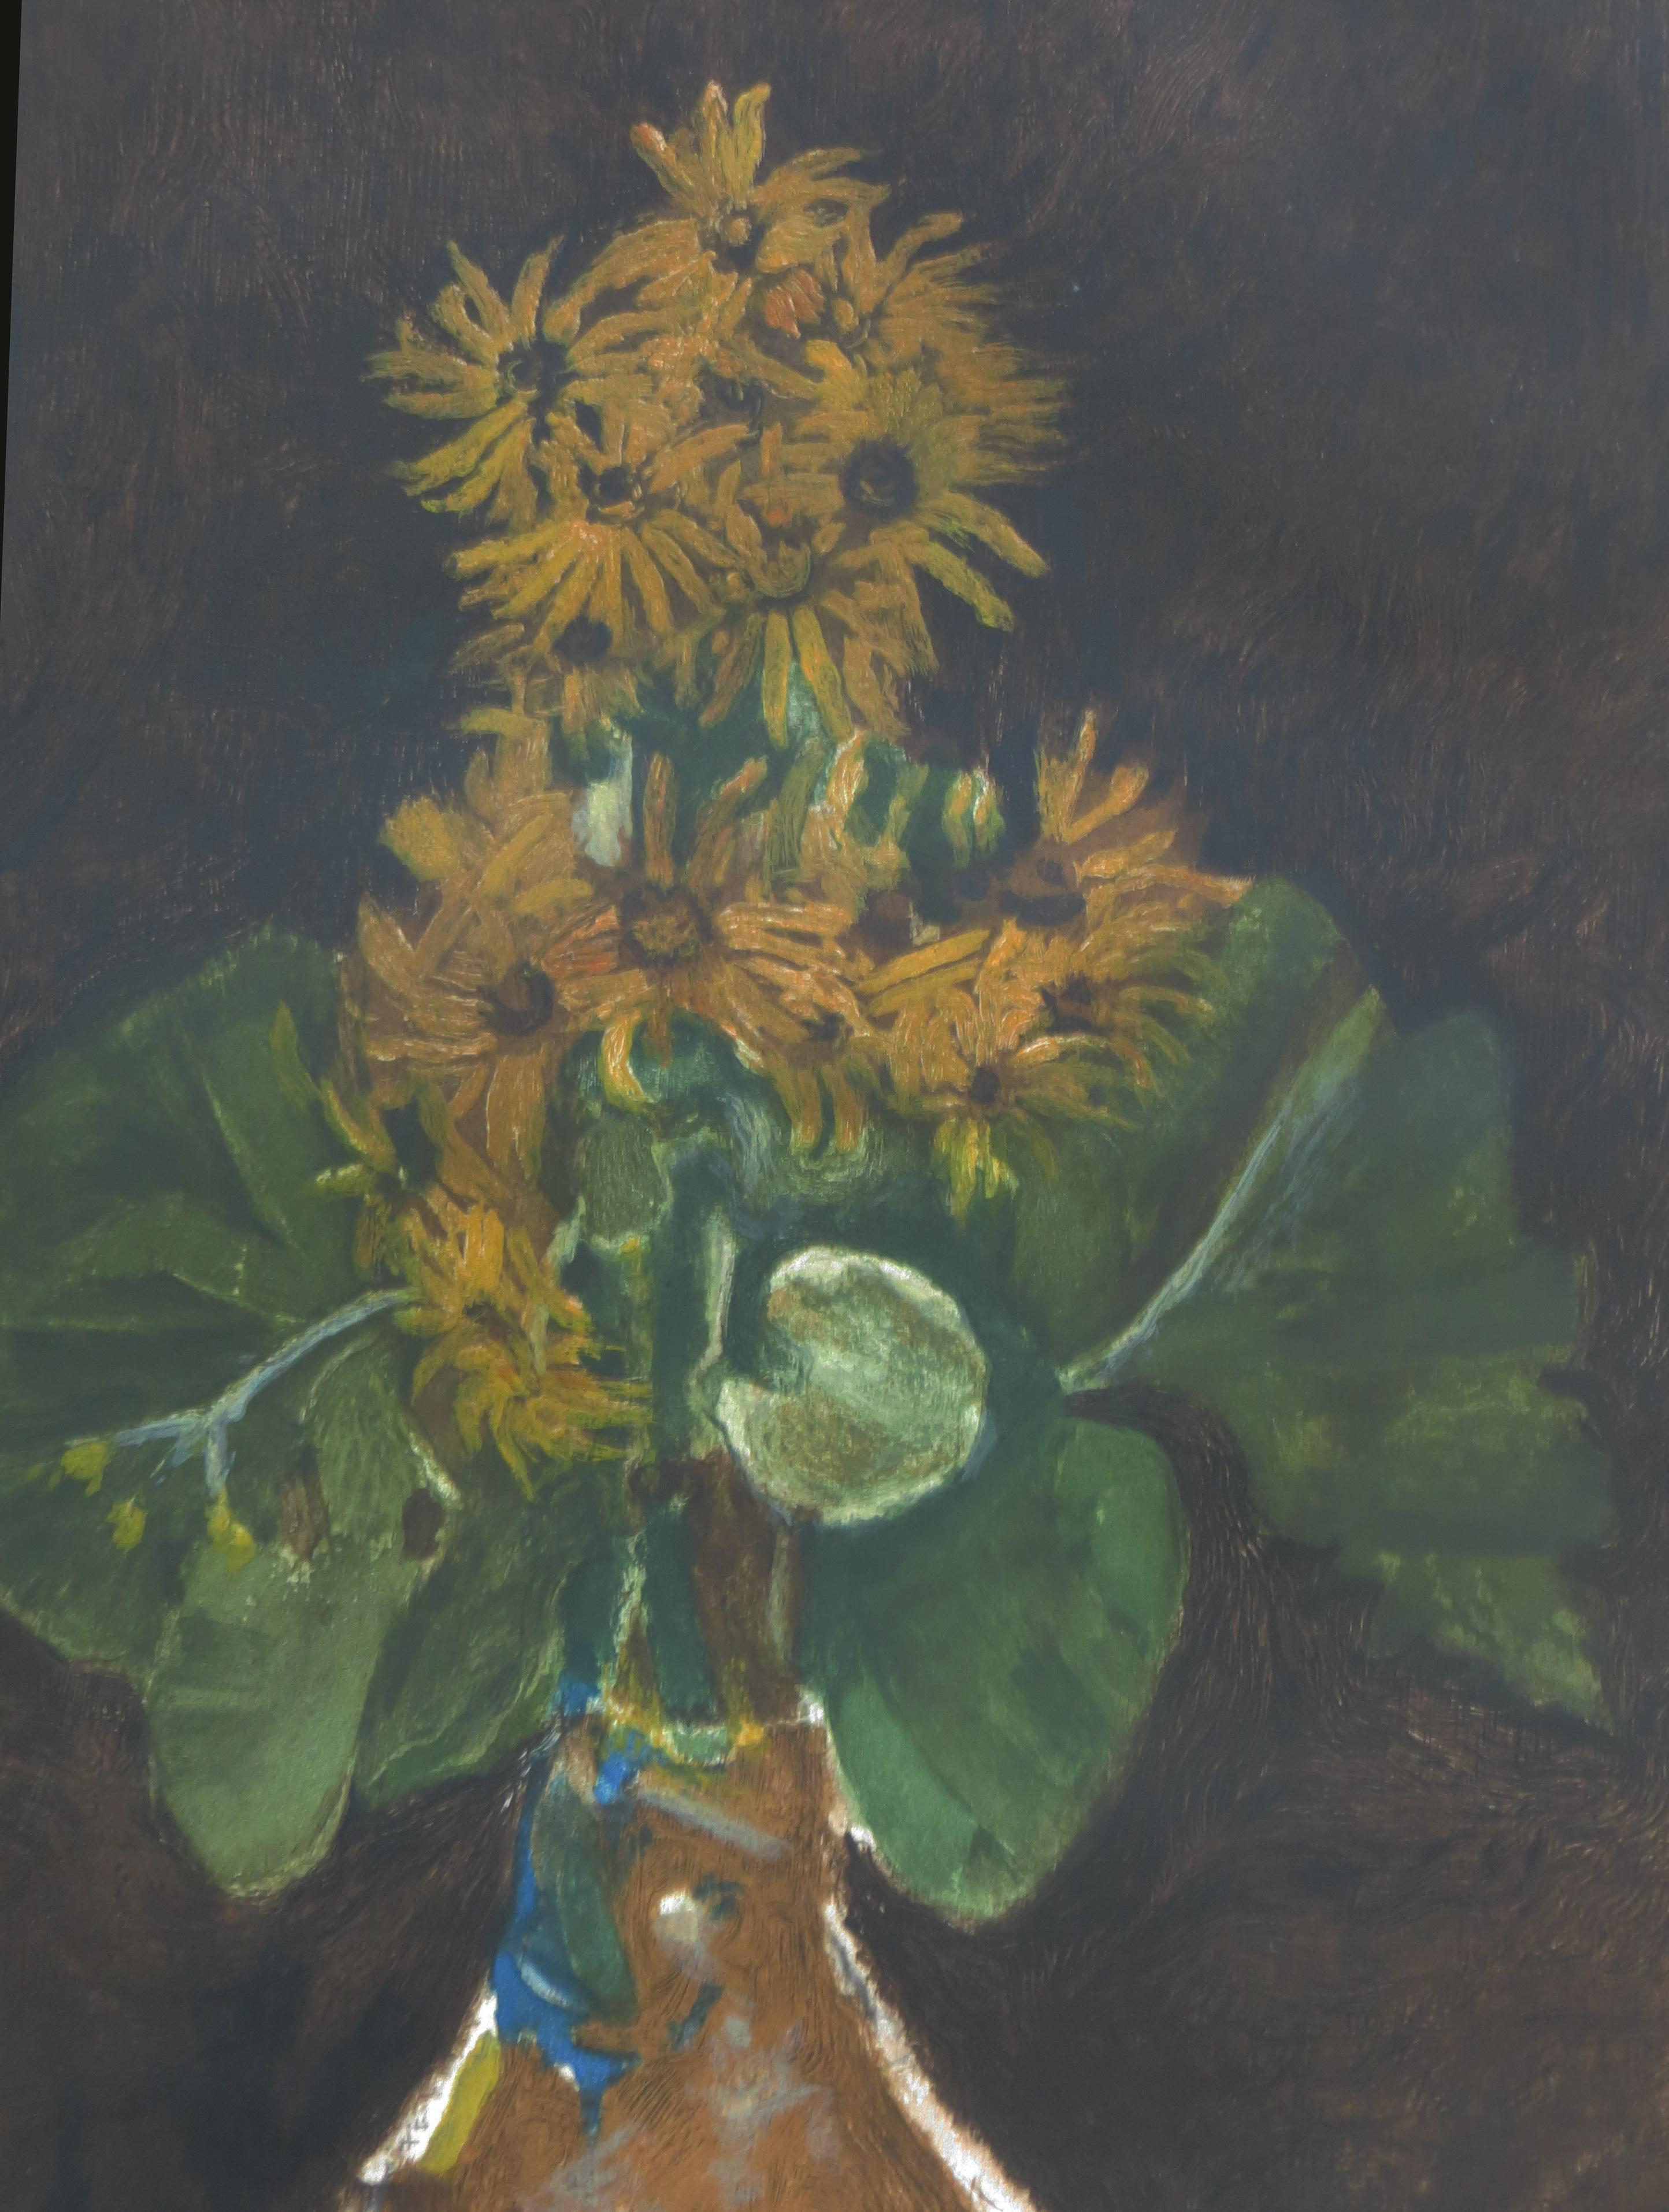 Les Marguerites (Daisies)  - Brown Still-Life Print by George Braque